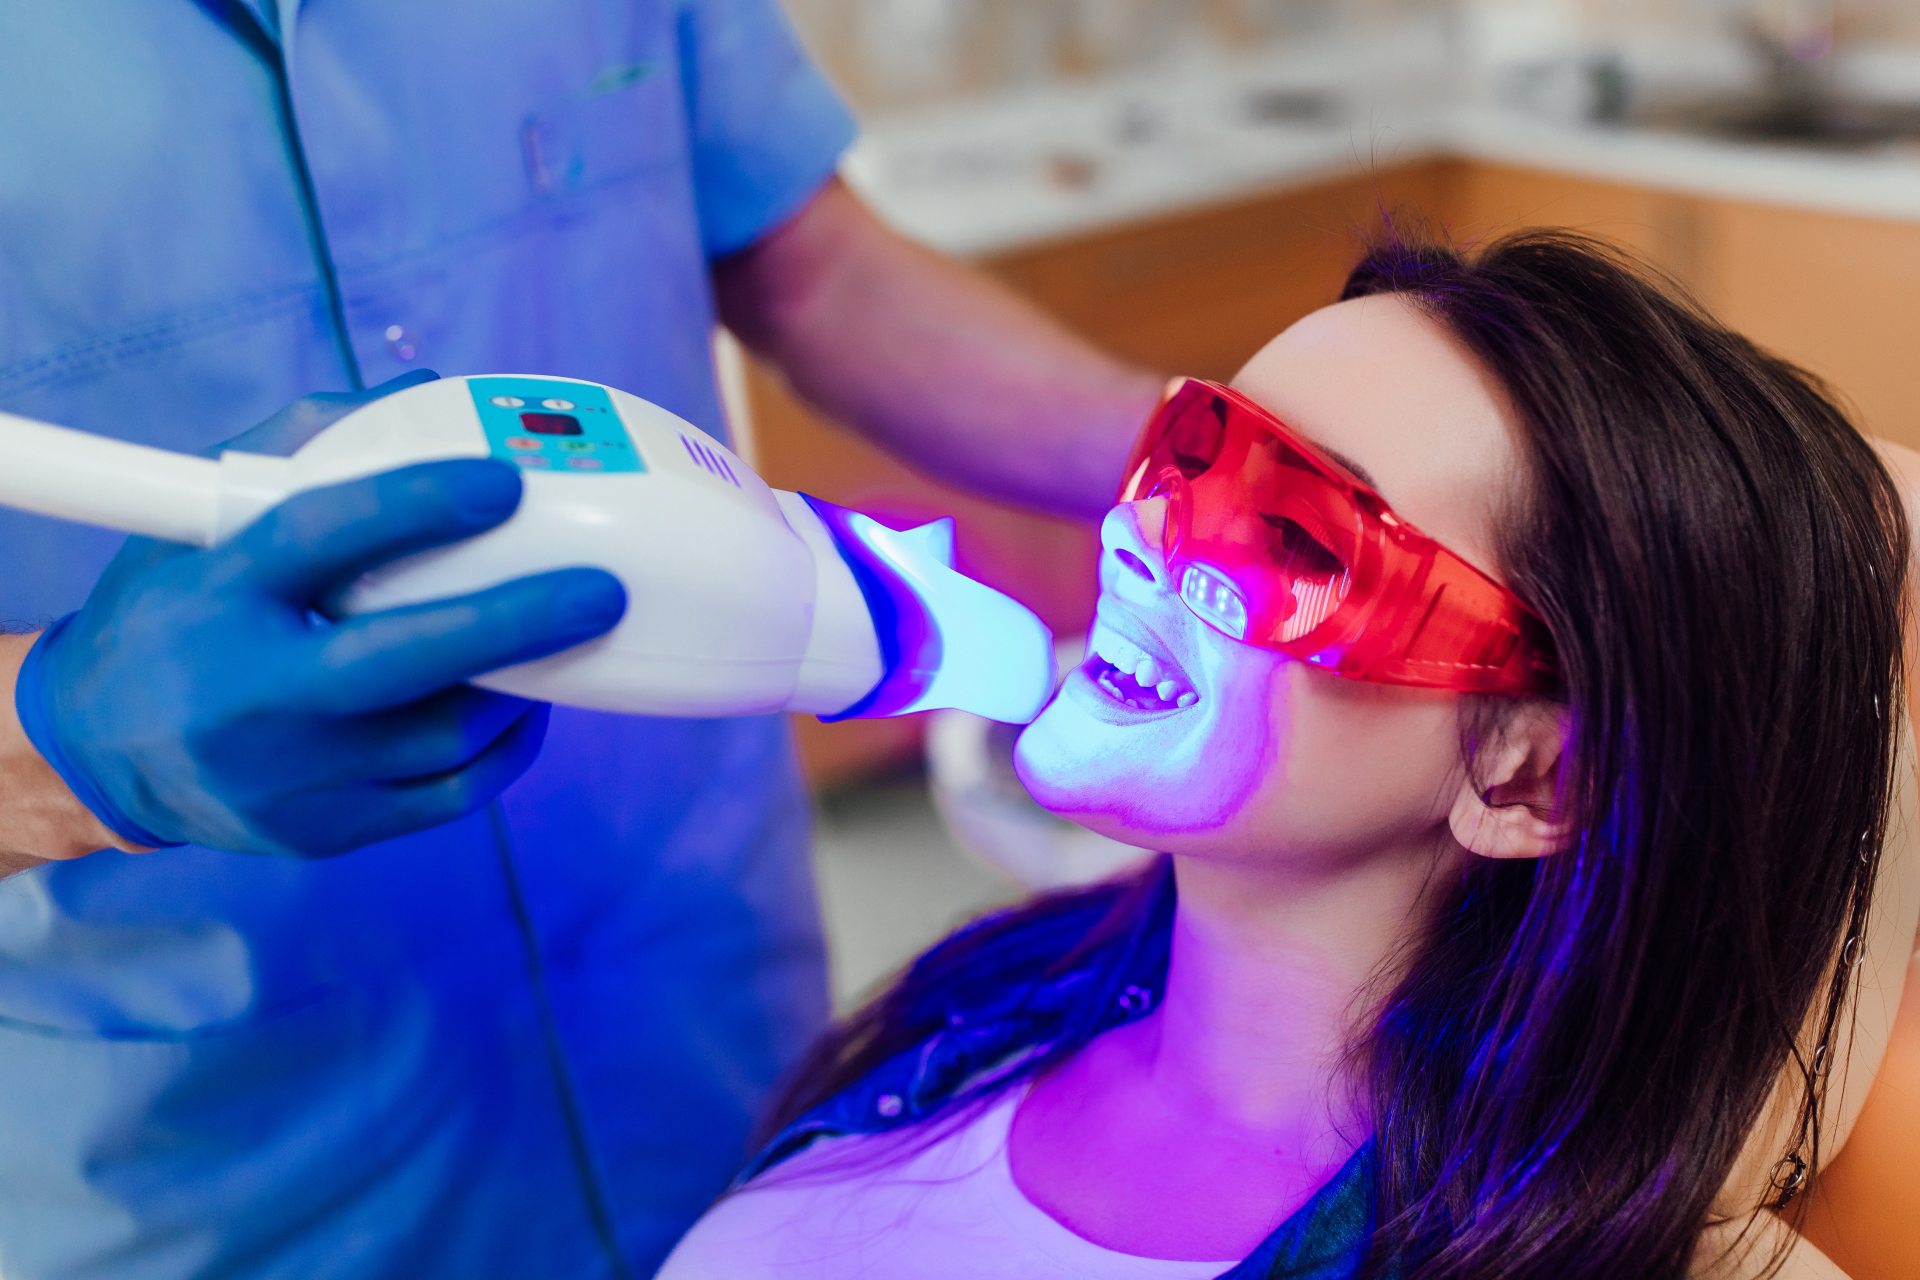 Teeth Whitening & Bleaching Services Clinic In Surrey, BC